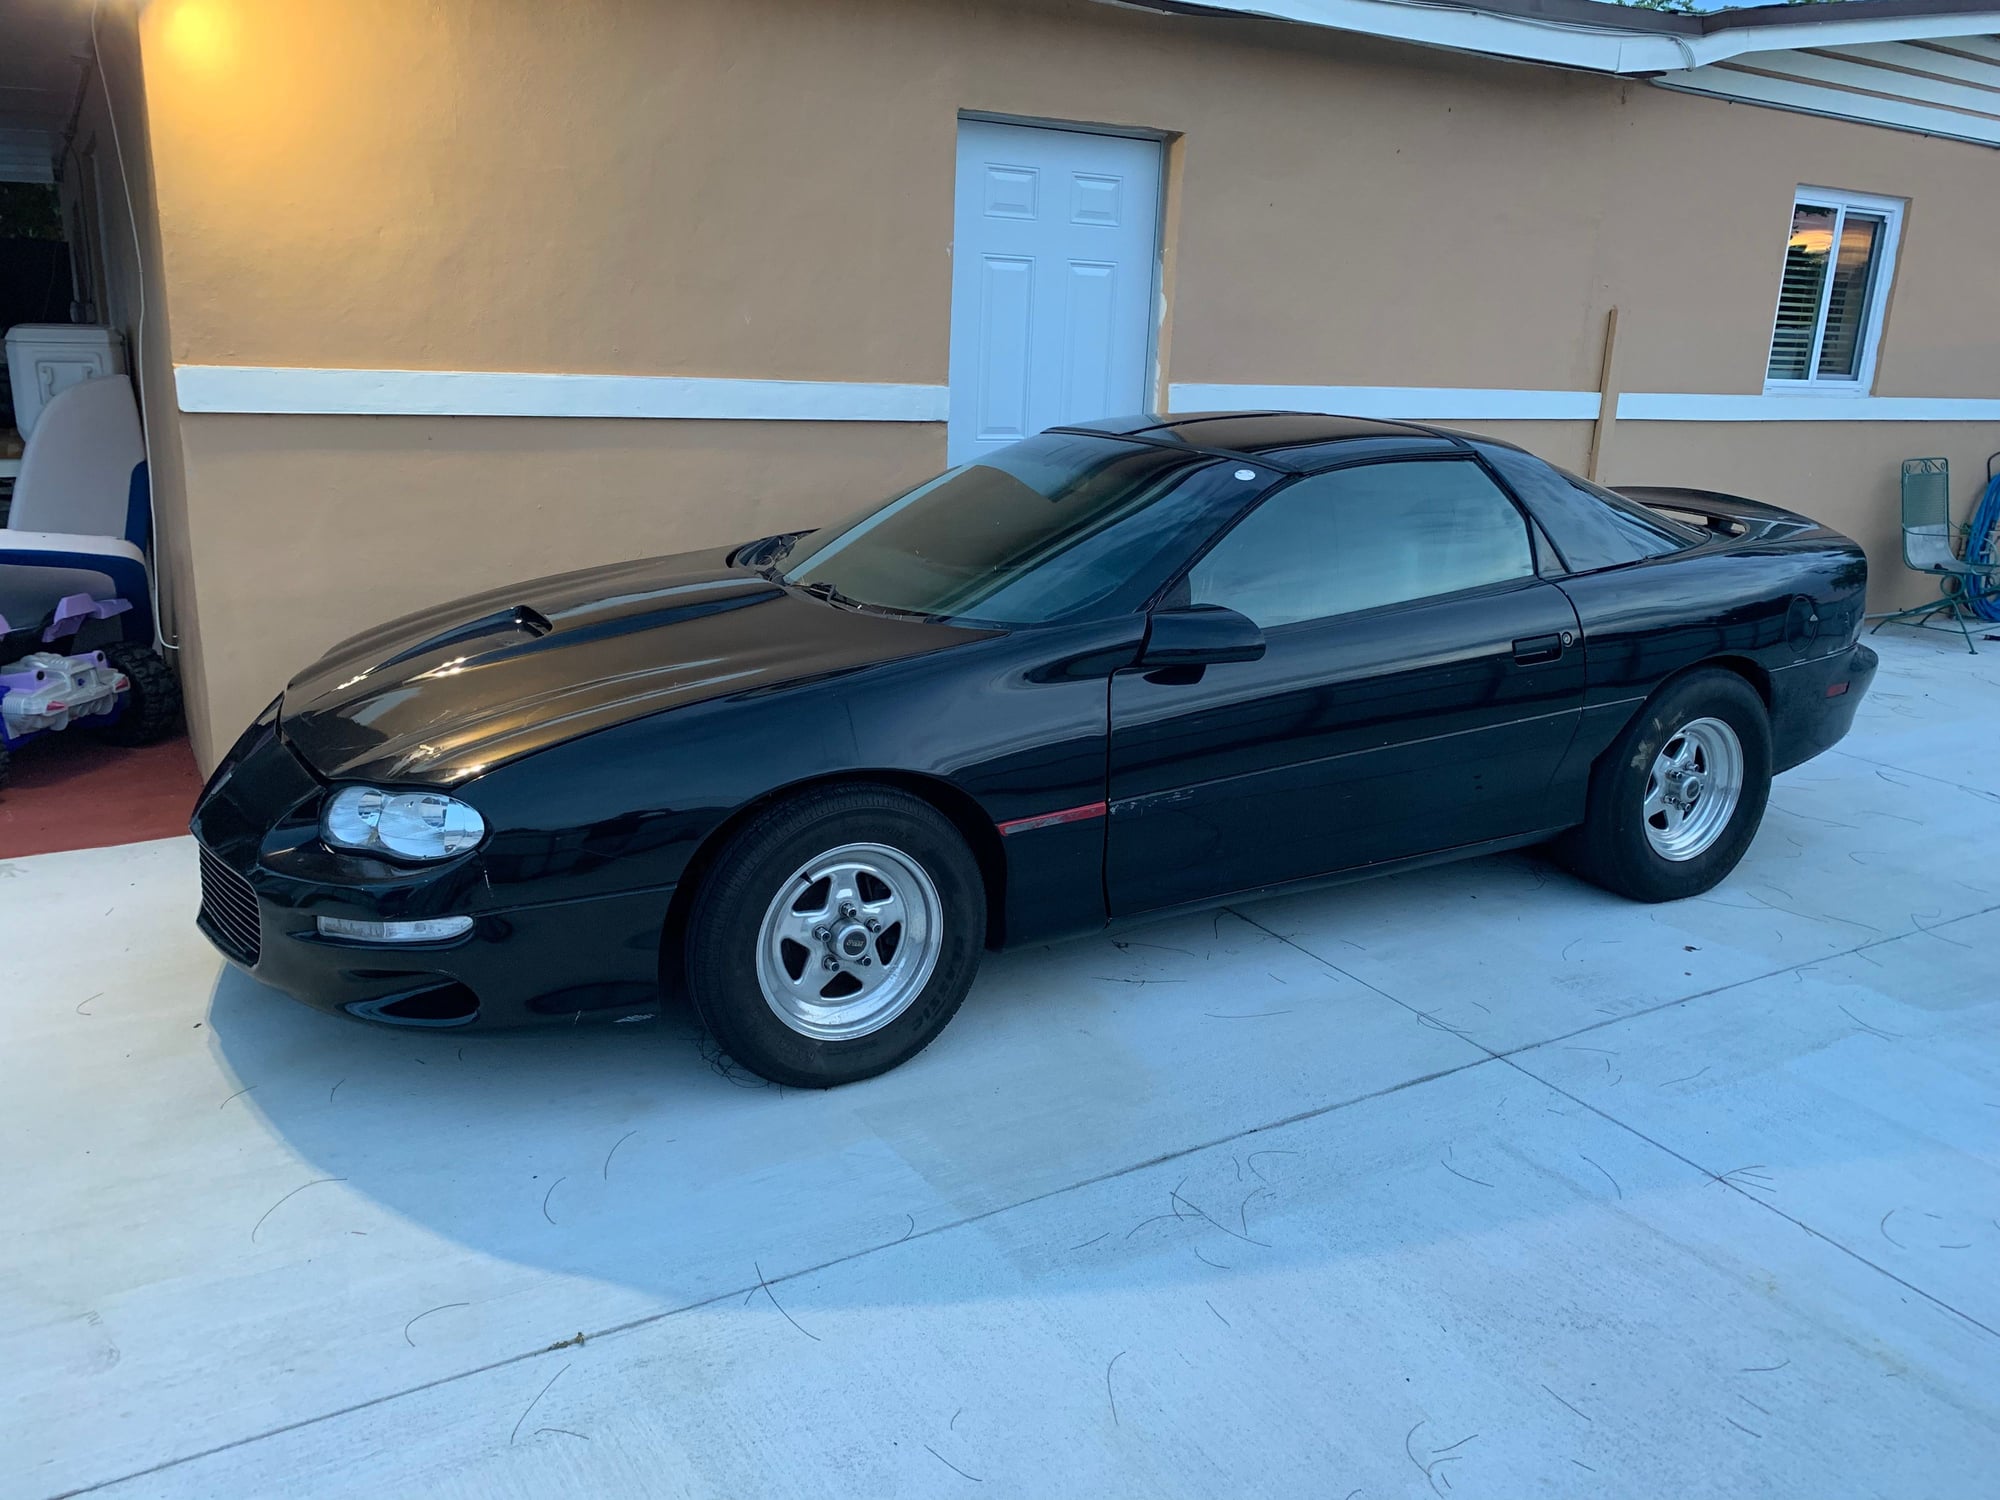 1998 Chevrolet Camaro - Selling my 9sec street strip camaro Ss - Used - VIN 2g1fp22g3w2128872 - 8 cyl - 2WD - Automatic - Coupe - Black - Miami, FL 33147, United States